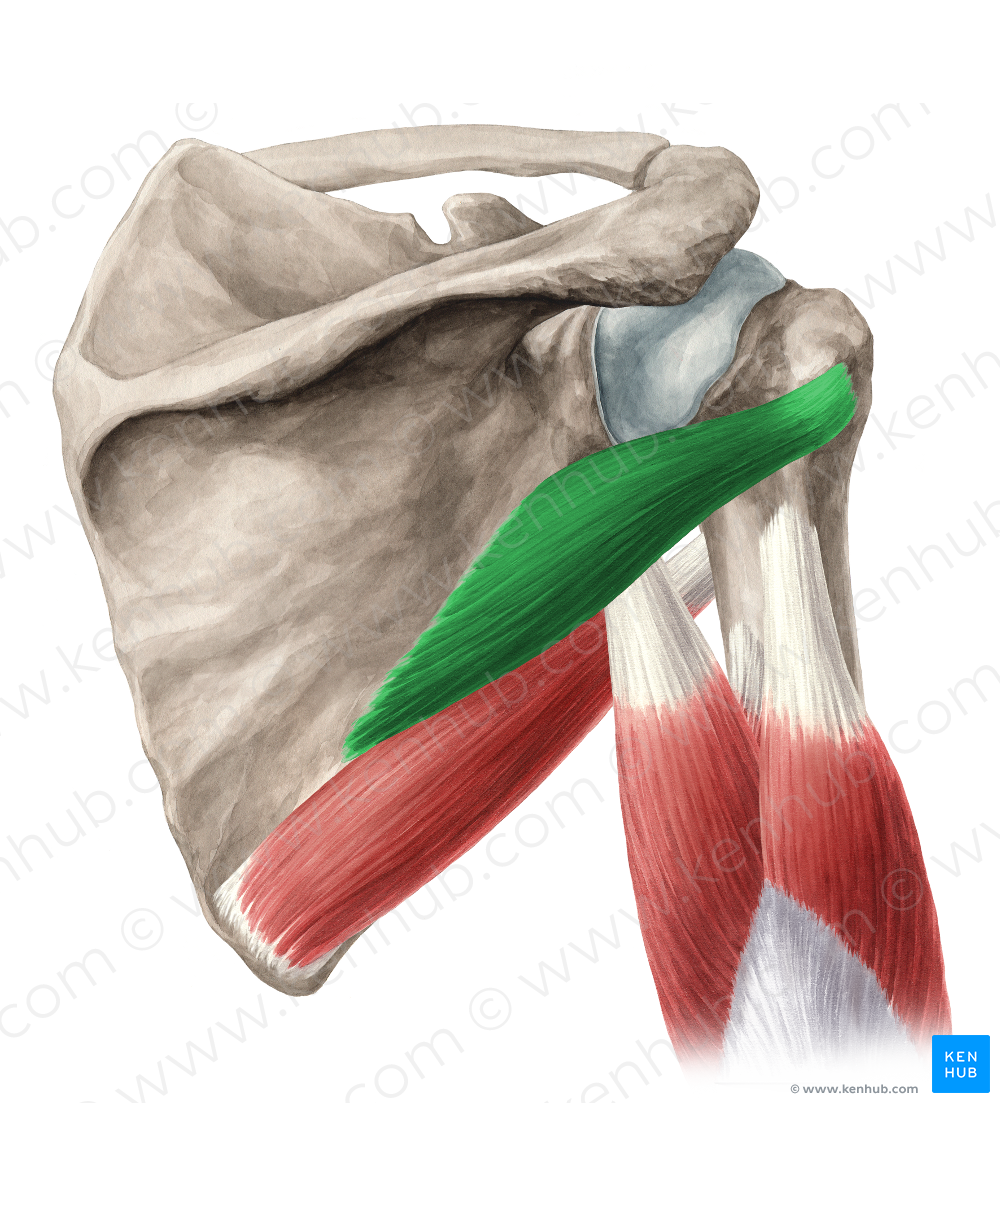 Teres minor muscle (#6085)